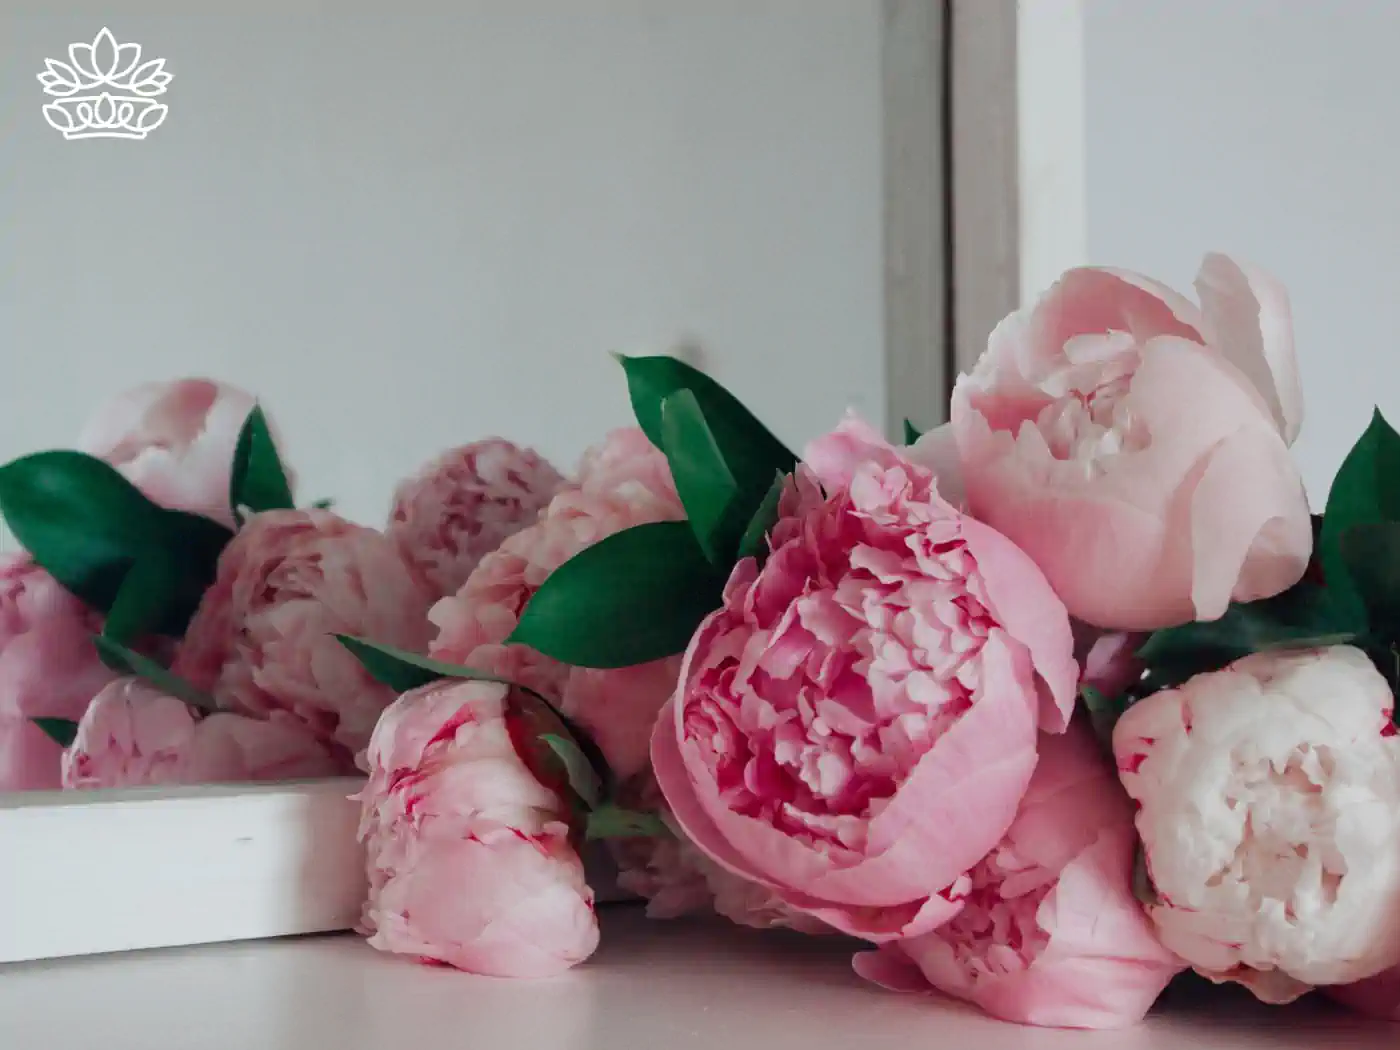 A delicate arrangement of pink peonies placed on a white surface. Fabulous Flowers and Gifts - Peonies Collection